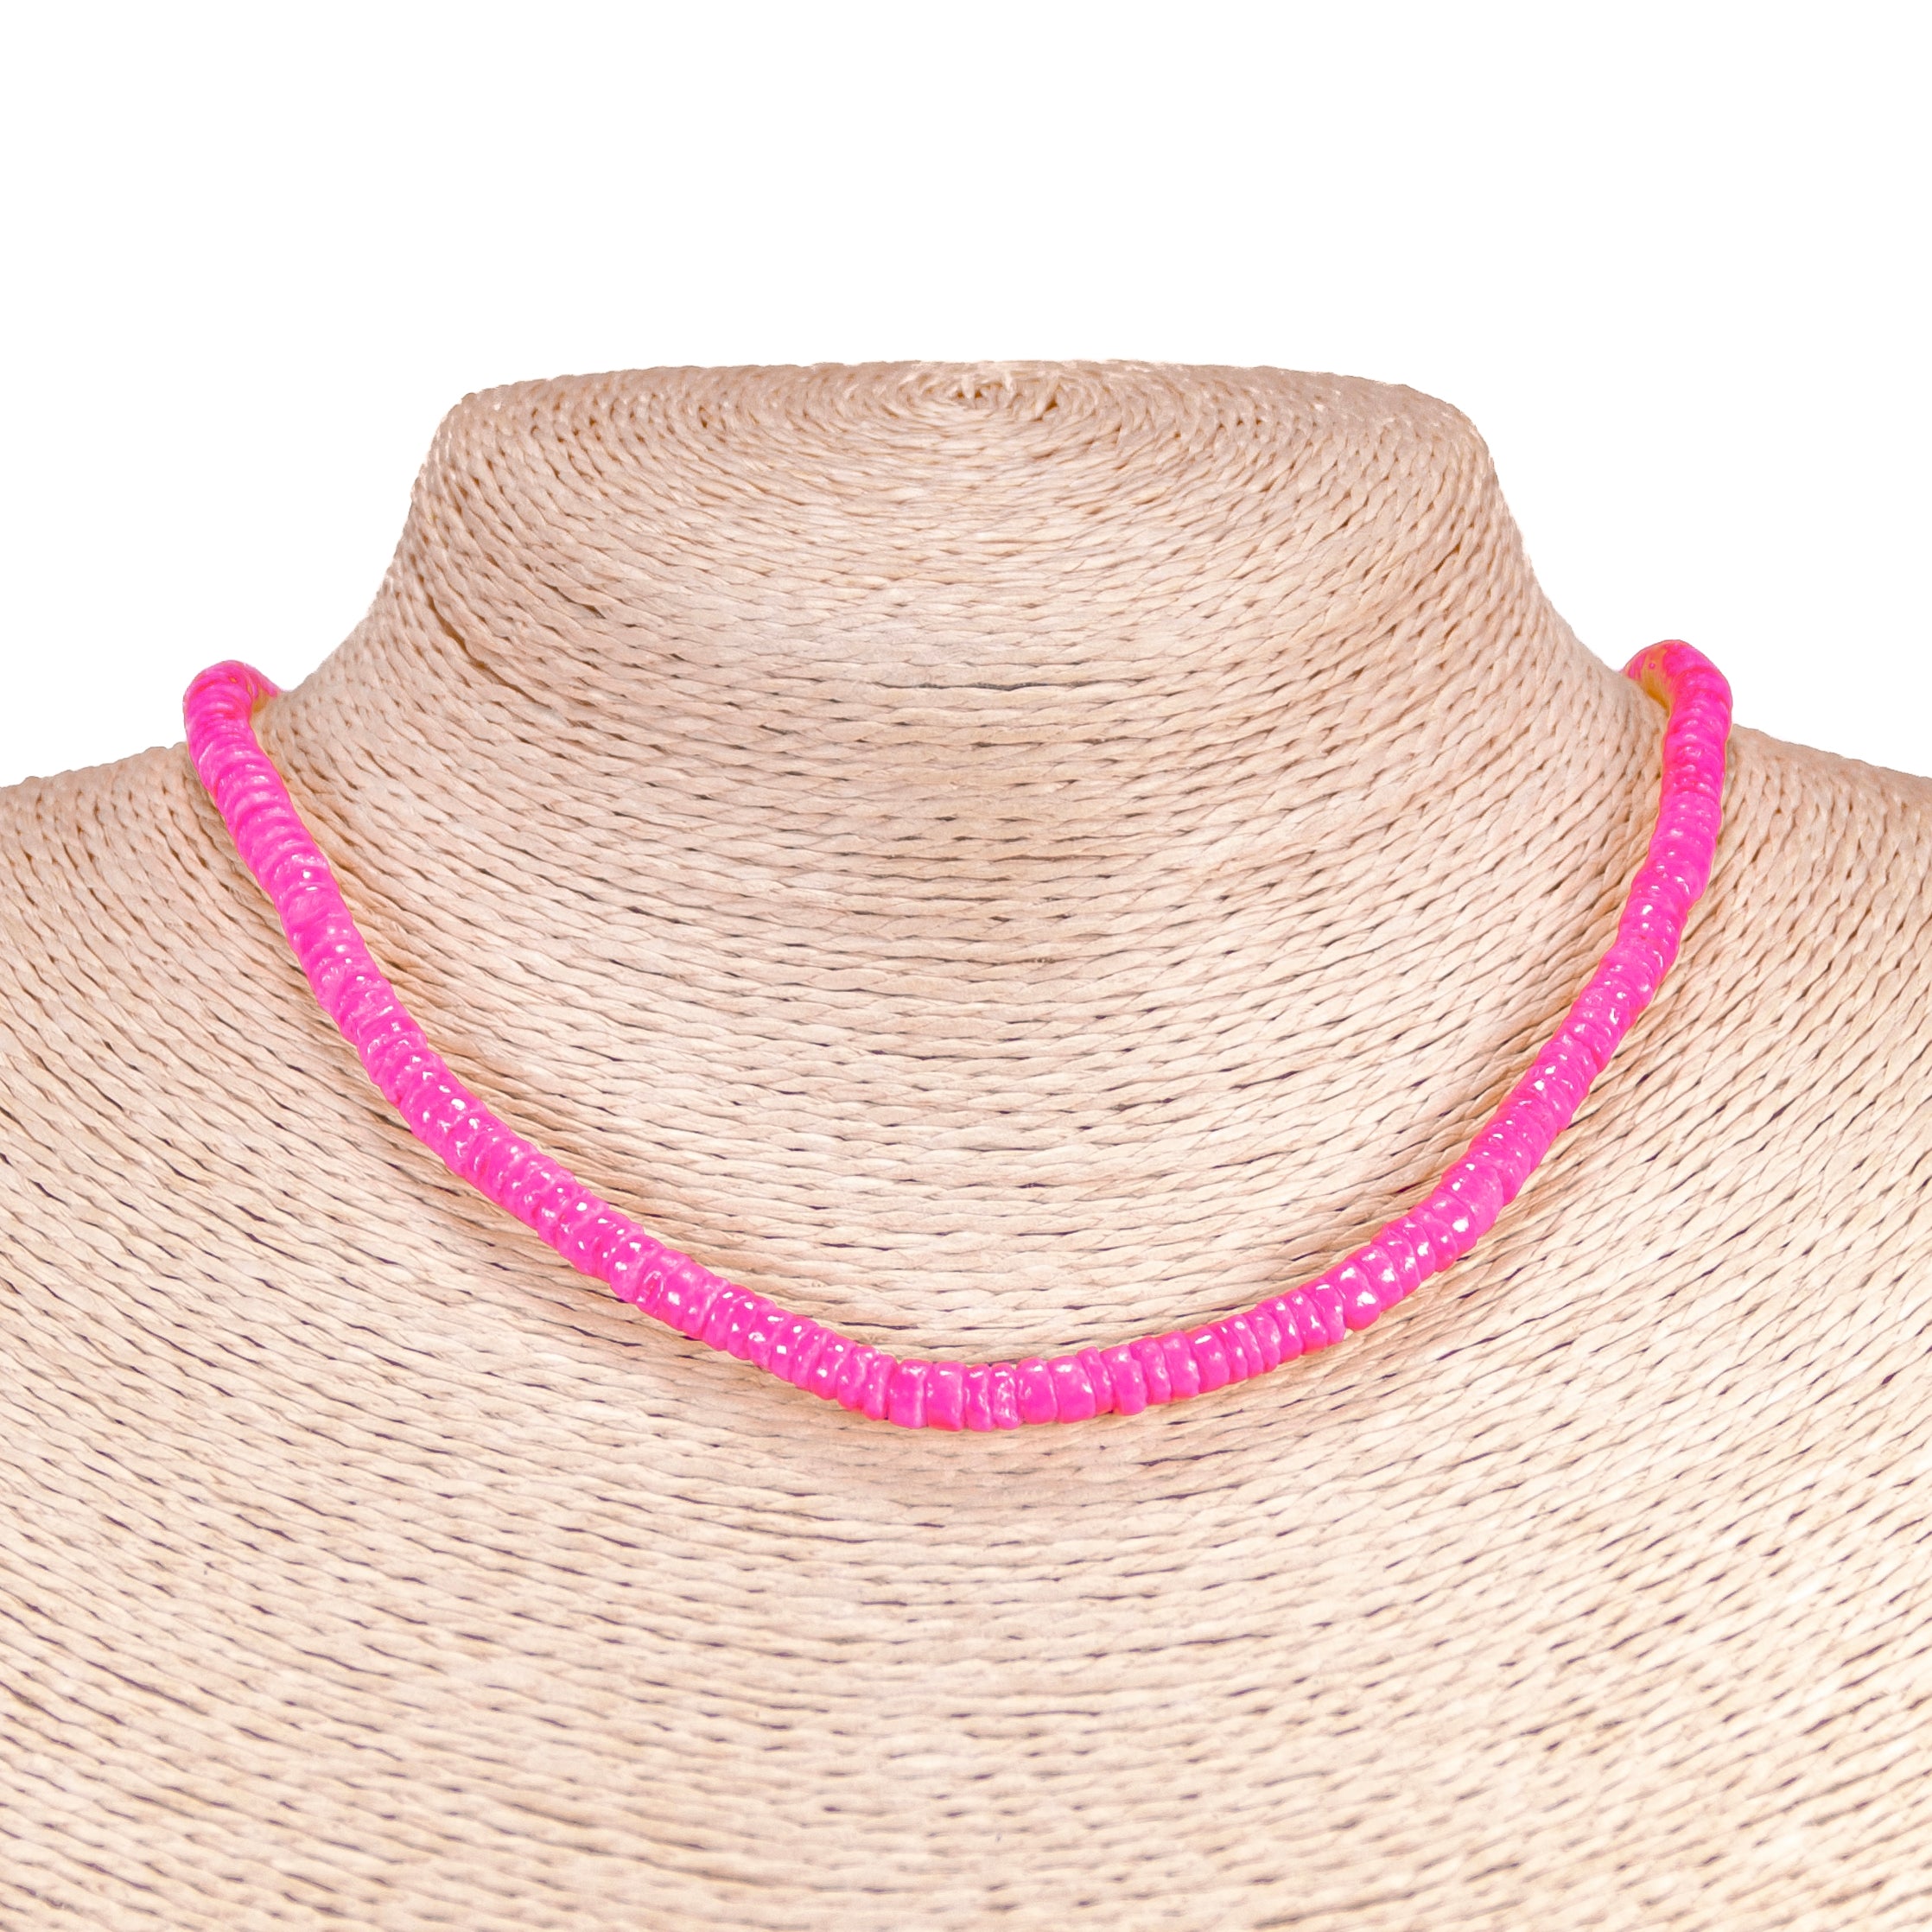 Neon Pink Puka Shell Beads Necklace and Anklet Set